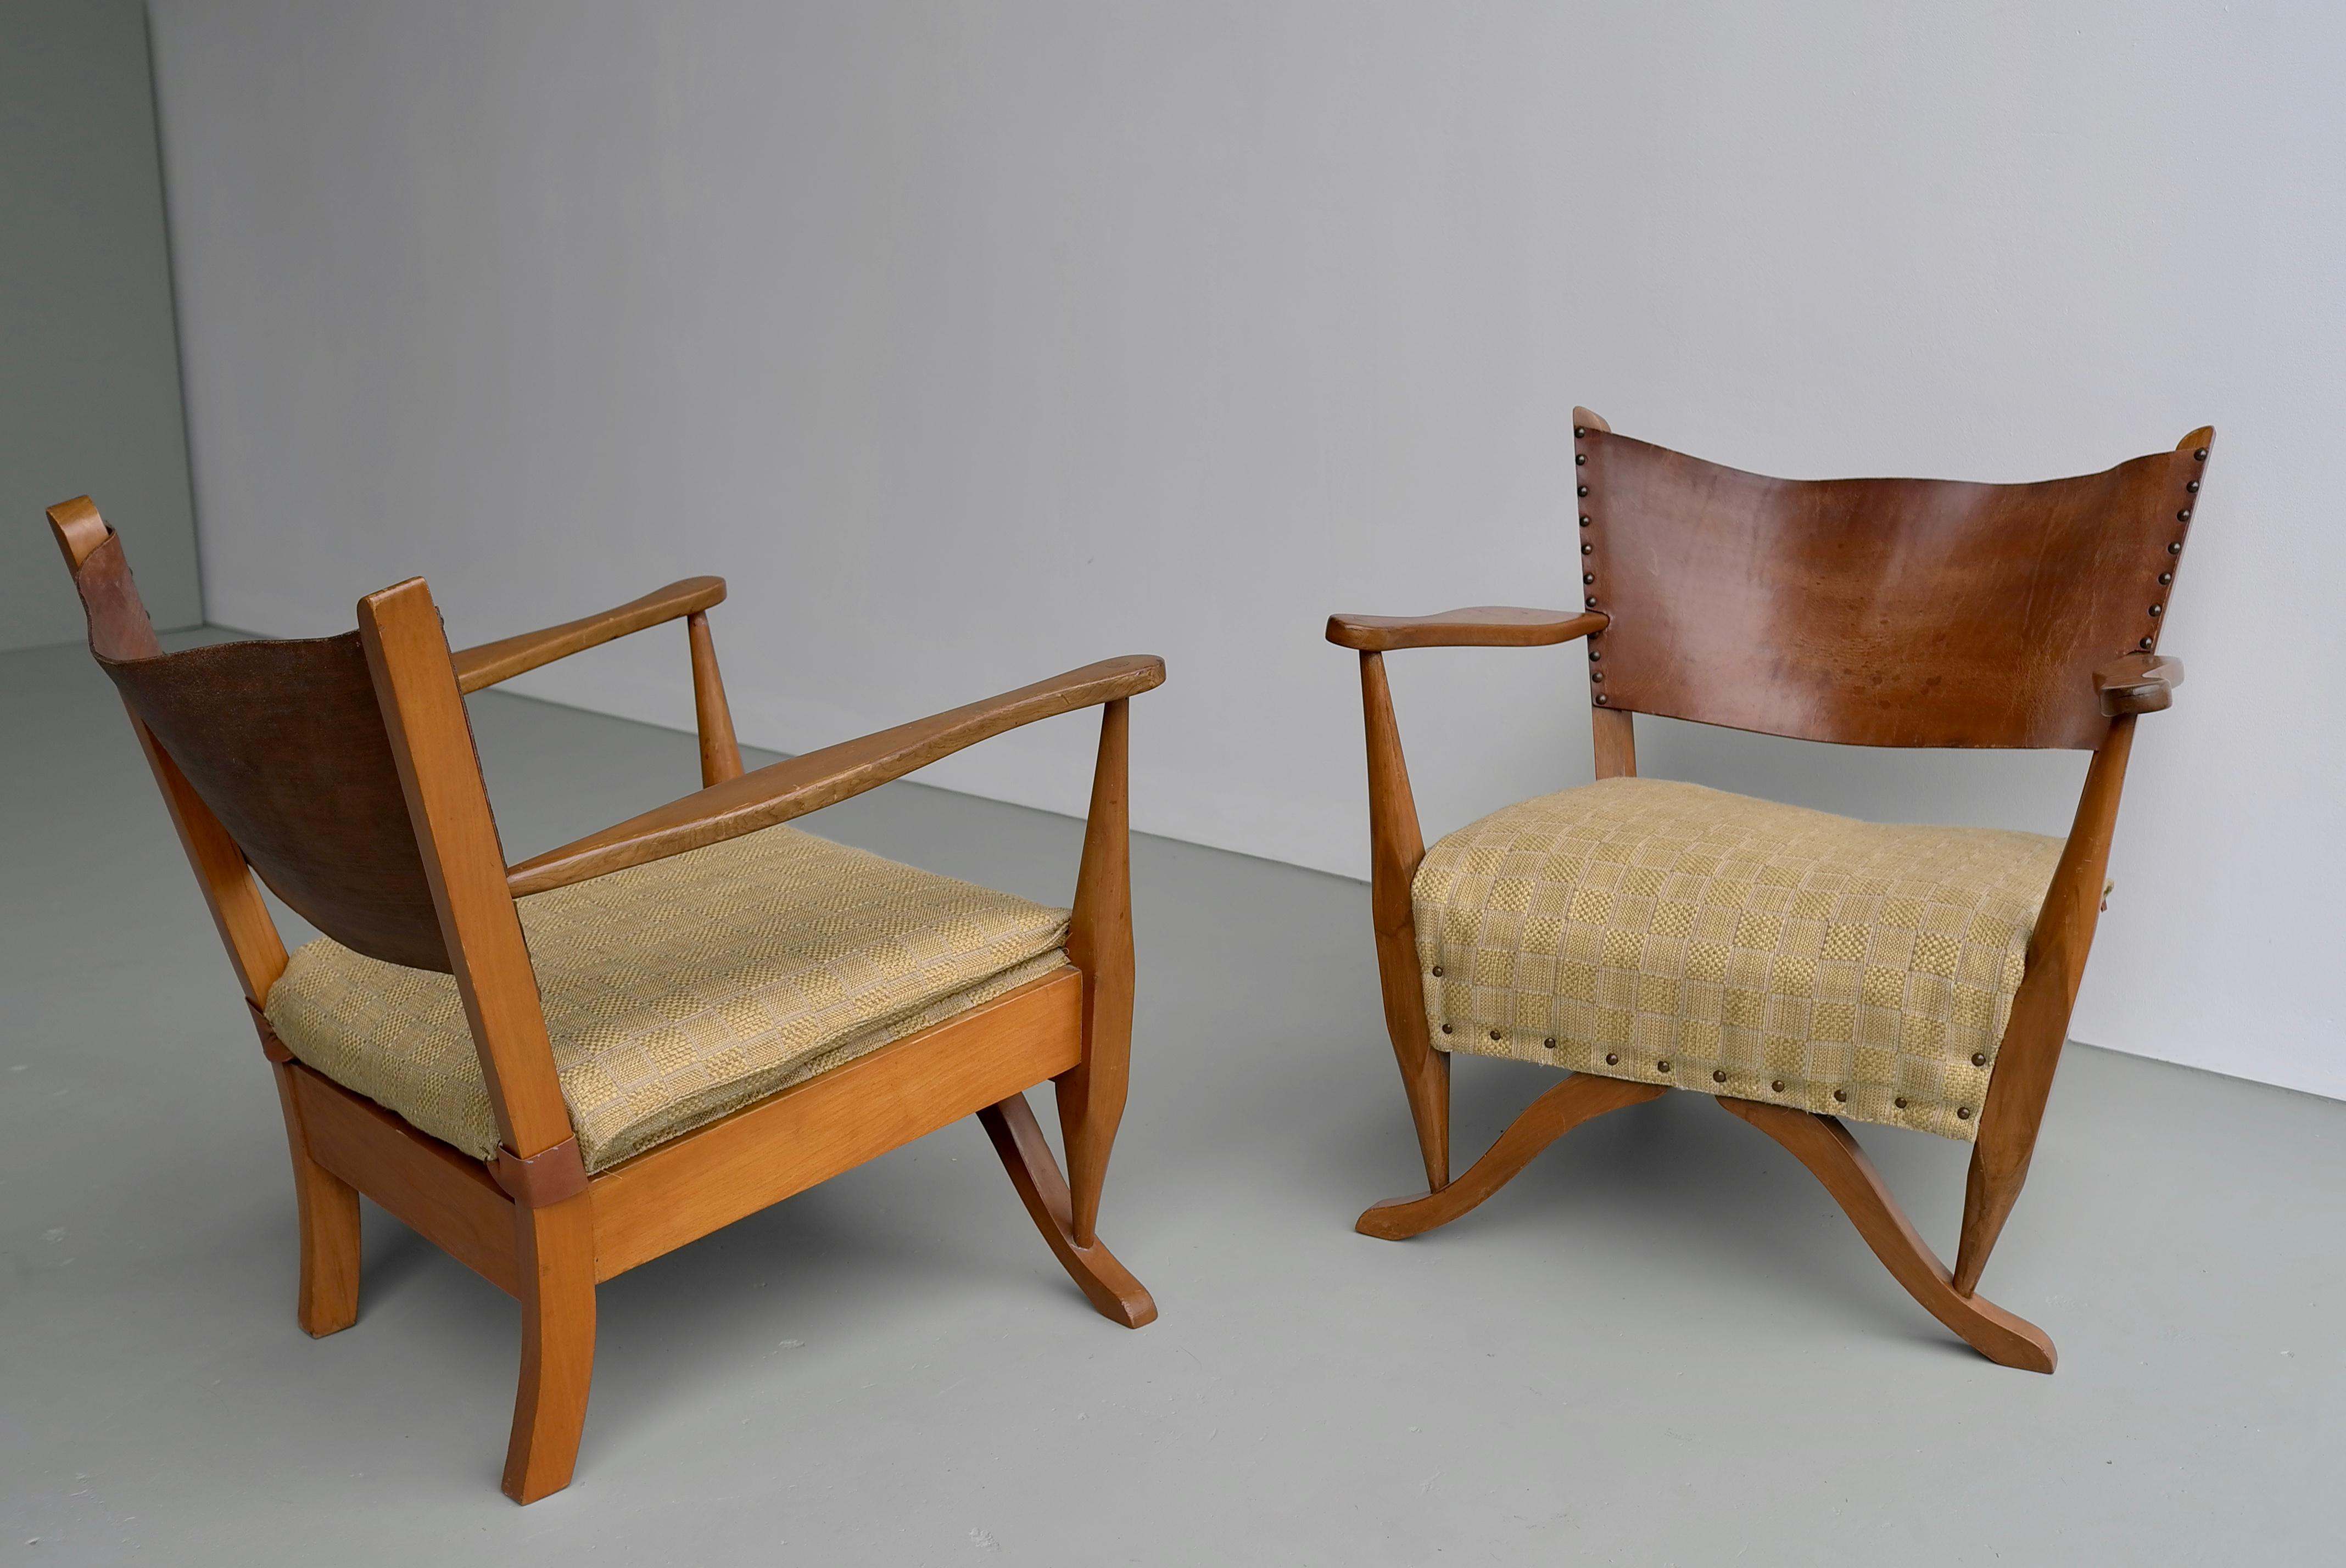 Danish Pair of Mahogany Armchairs with Natural Sling Leather Back, Denmark, 1960s For Sale